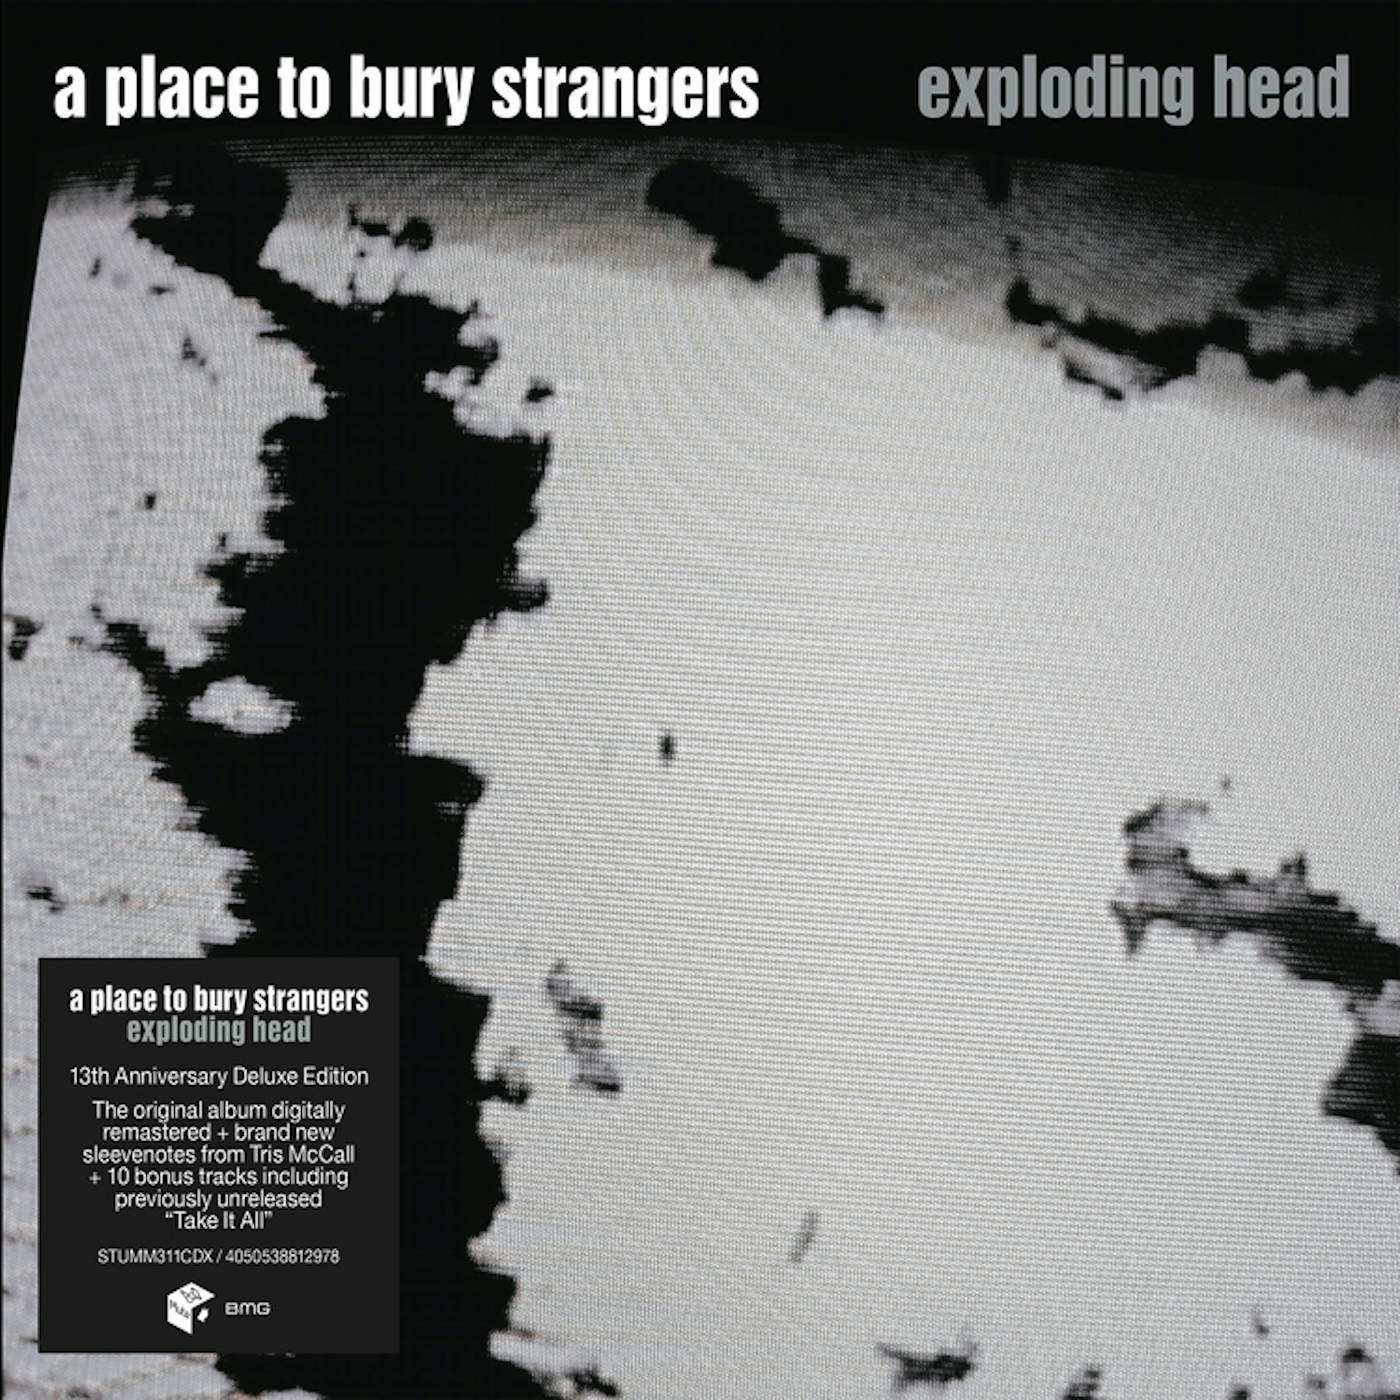 A Place To Bury Strangers Exploding Head CD